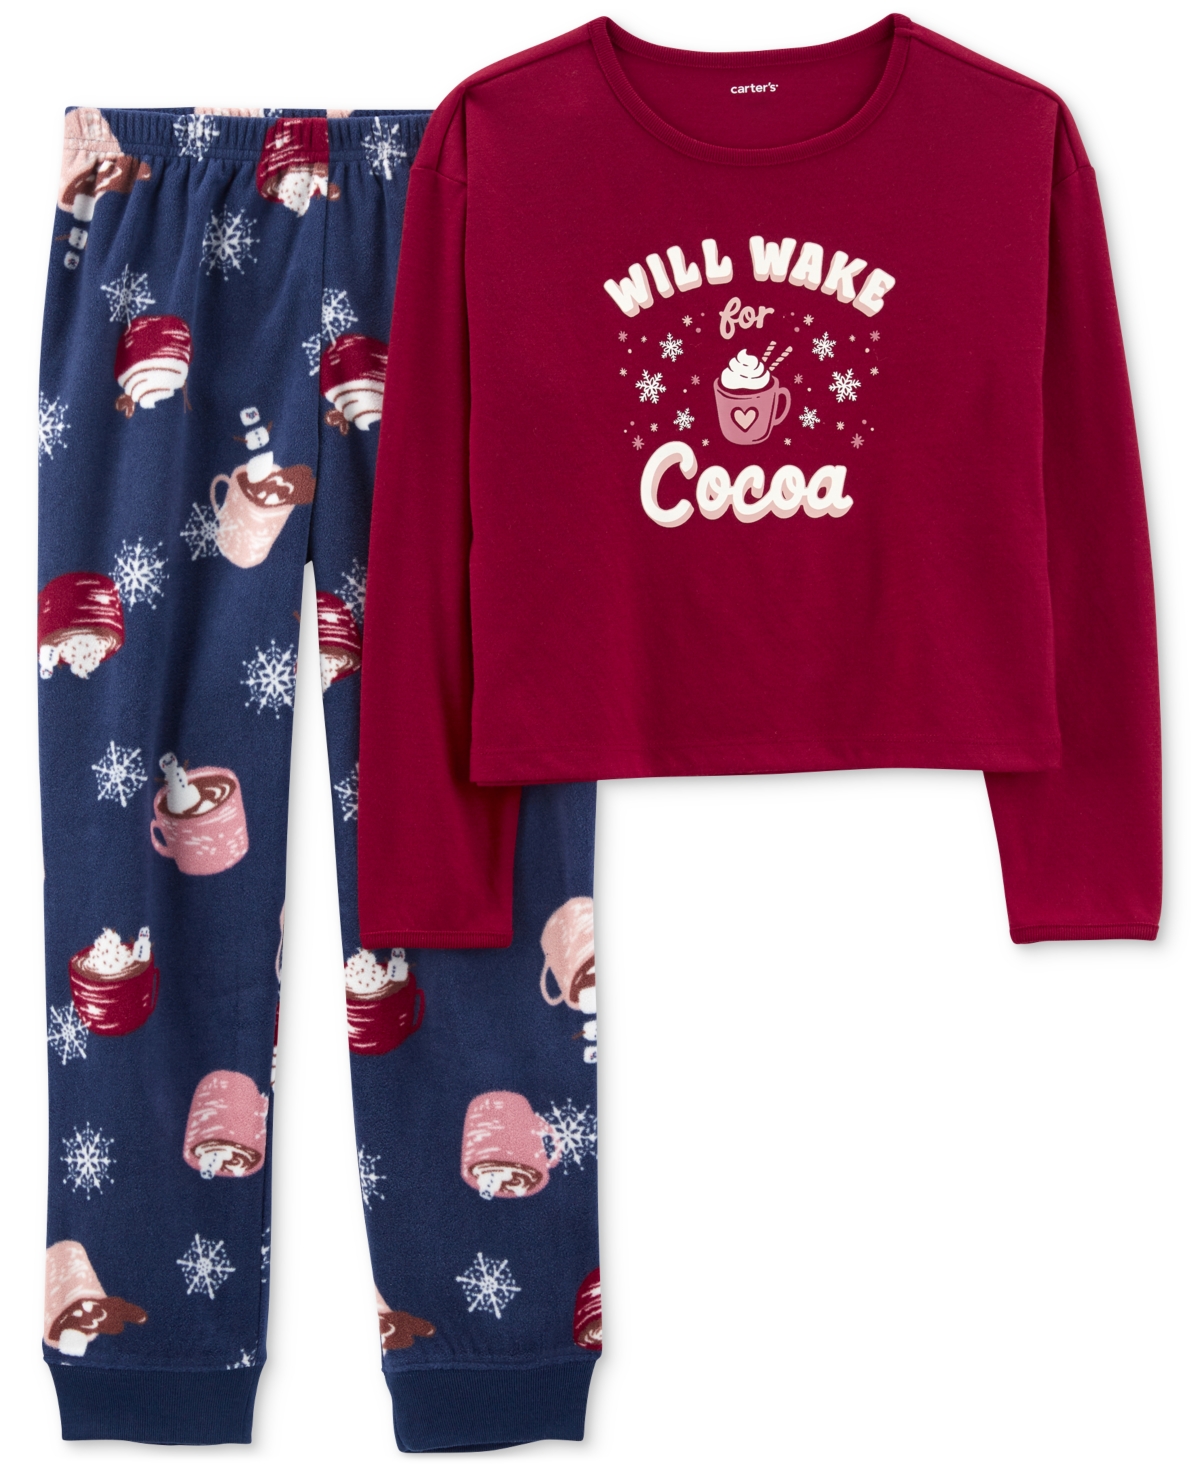 Carter's Kids' Big Girls Will Wake For Cocoa Pajamas, 2 Piece Set In Burgendy,navy